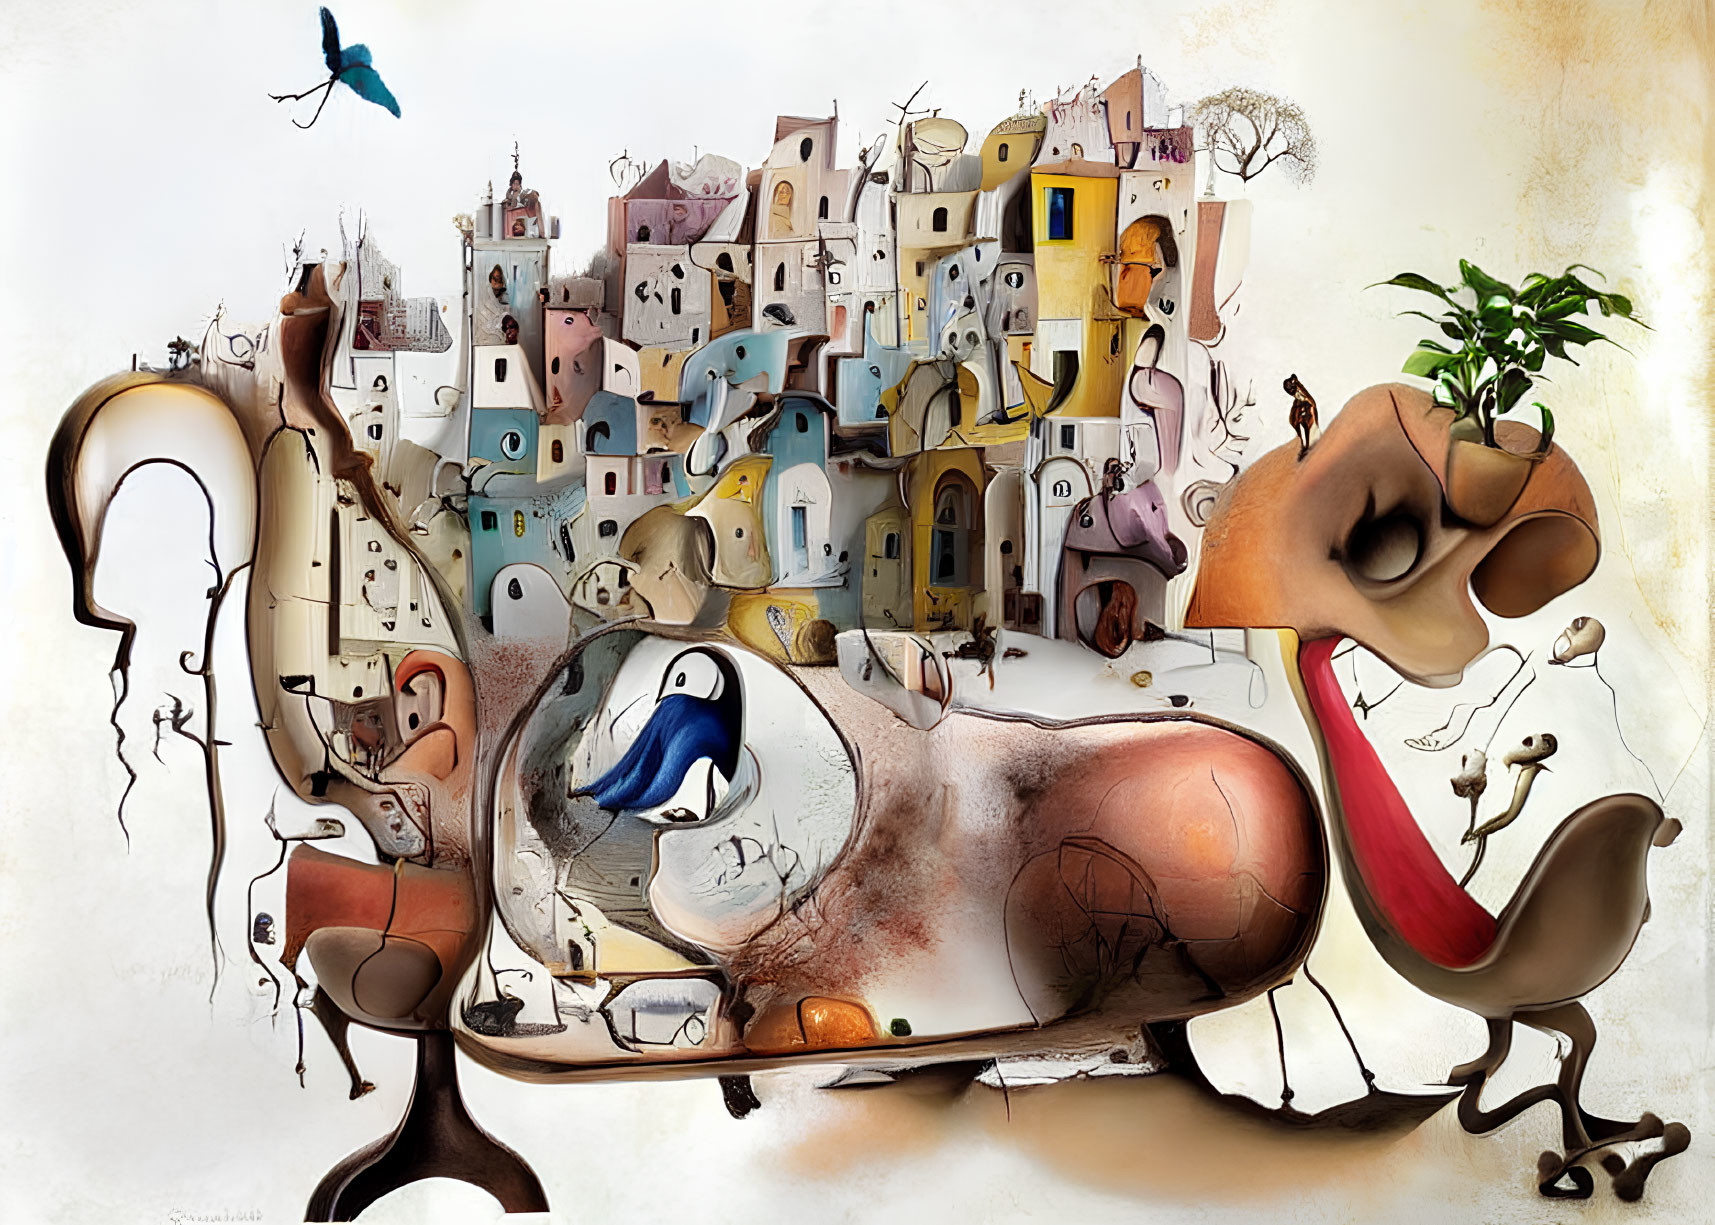 Abstract surreal artwork: fluid townscape with pastel buildings merging into whimsical animal-like shapes on off